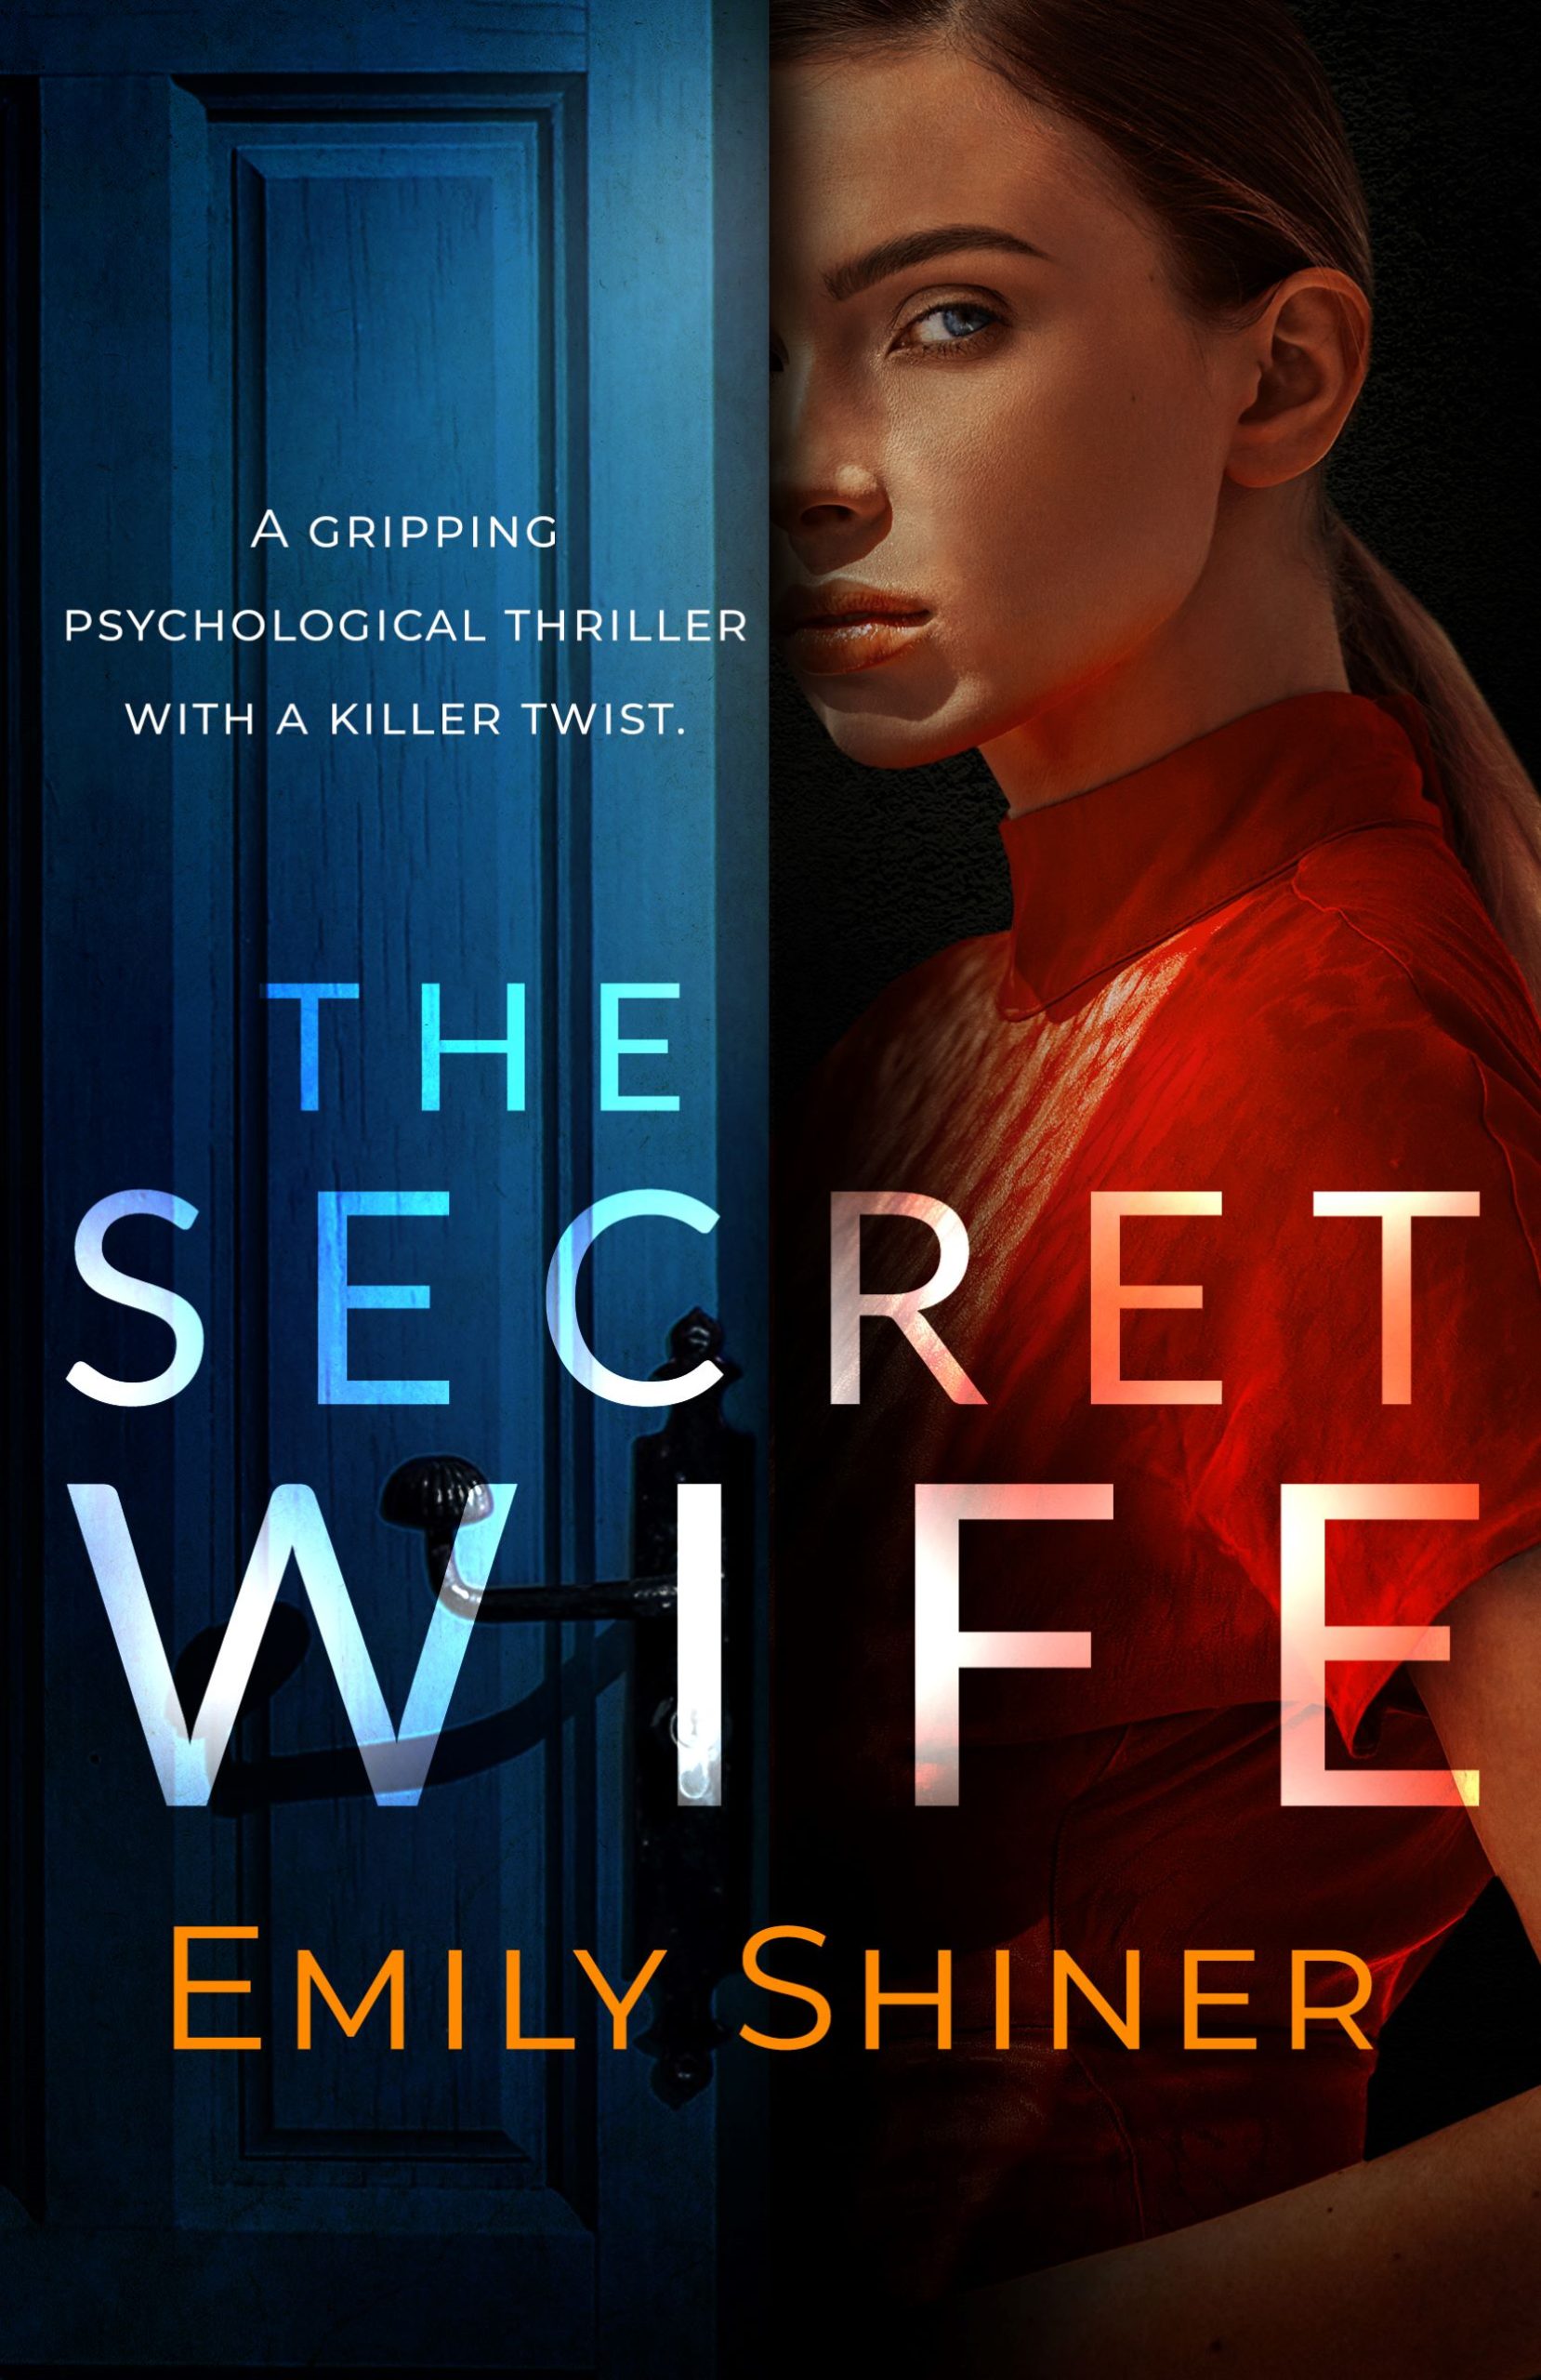 EMILY SHINER NEW RELEASE – THE SECRET WIFE